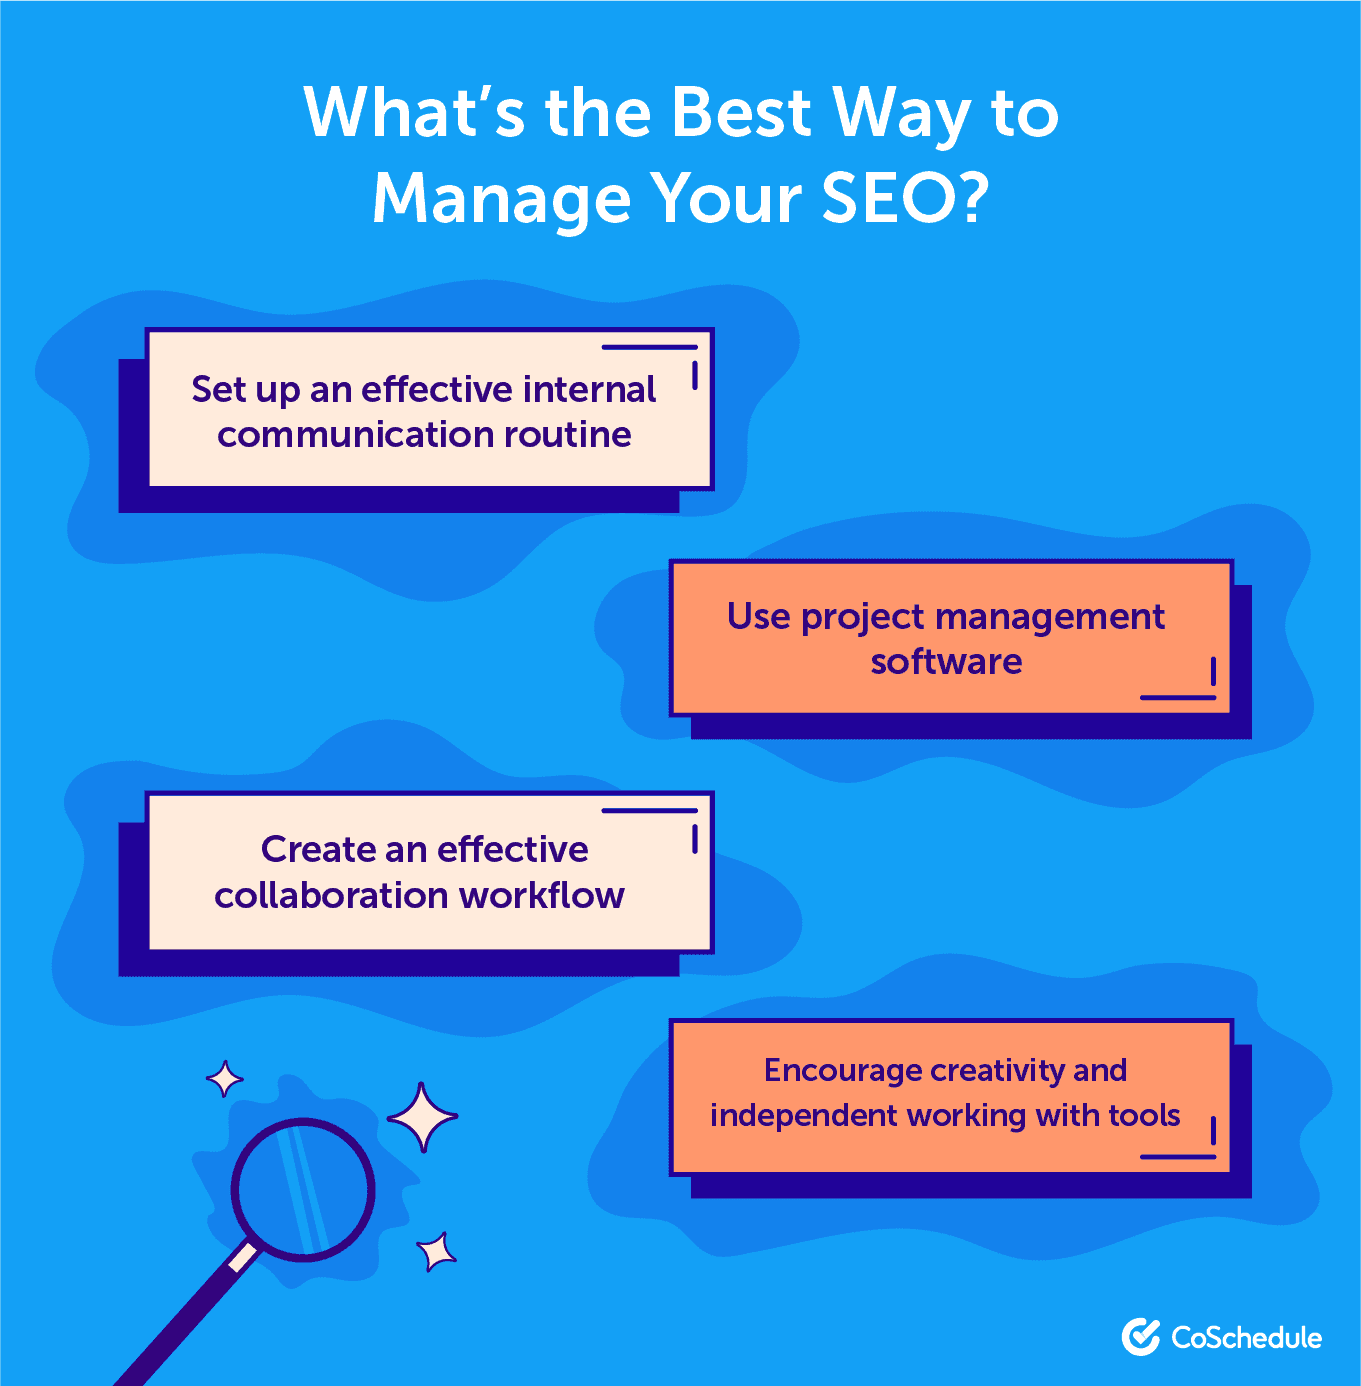 Best way to manage SEO